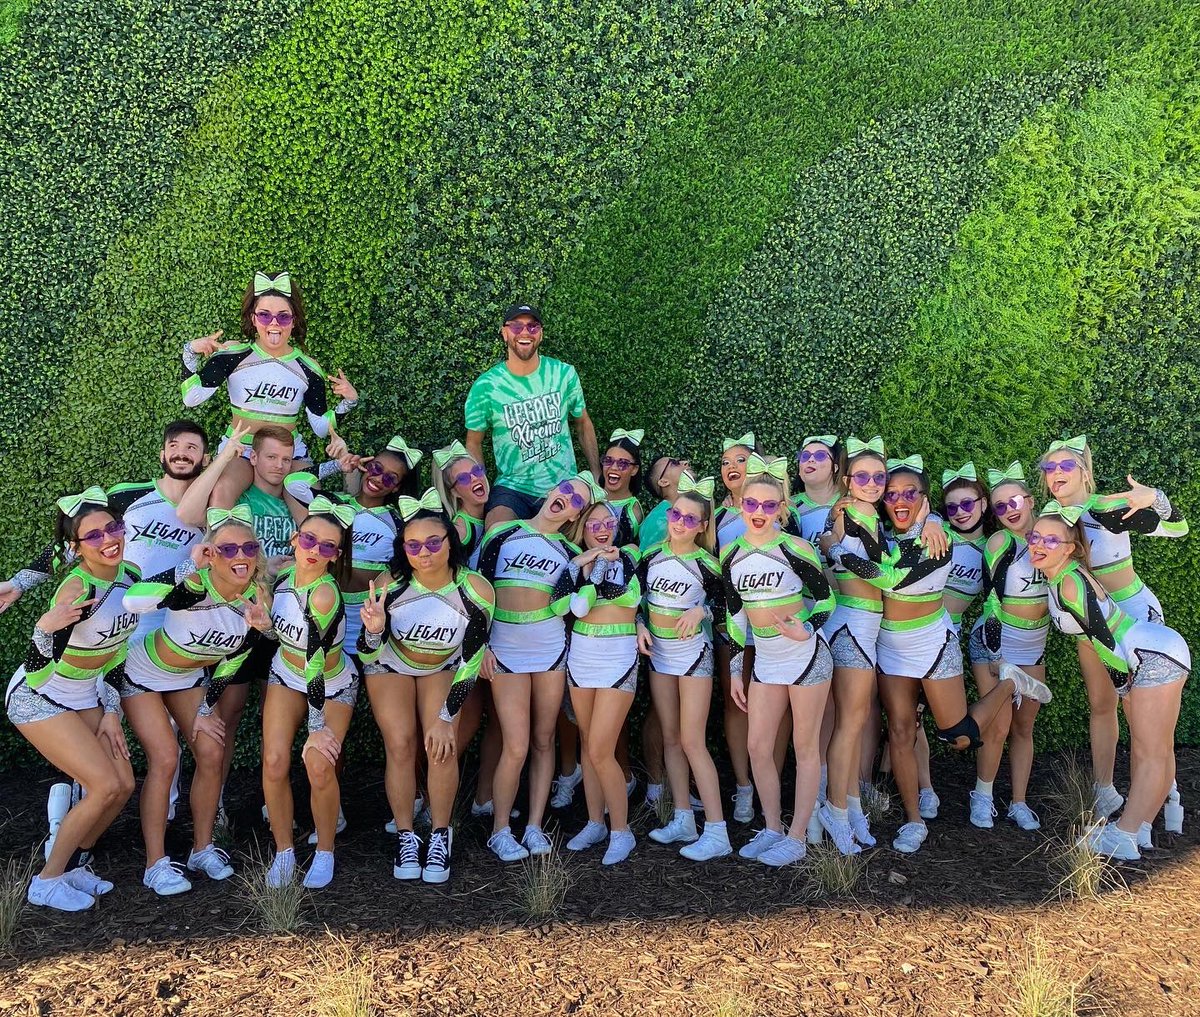 BOOMSLANGS about to bring it on Day✌🏼you won’t want to miss this! Tune in to VarsityTV today at 3:56p Hall B5! GOOD LUCK AND LOTS OF #LEGACYLOVE 💚💥 @lxboomslang